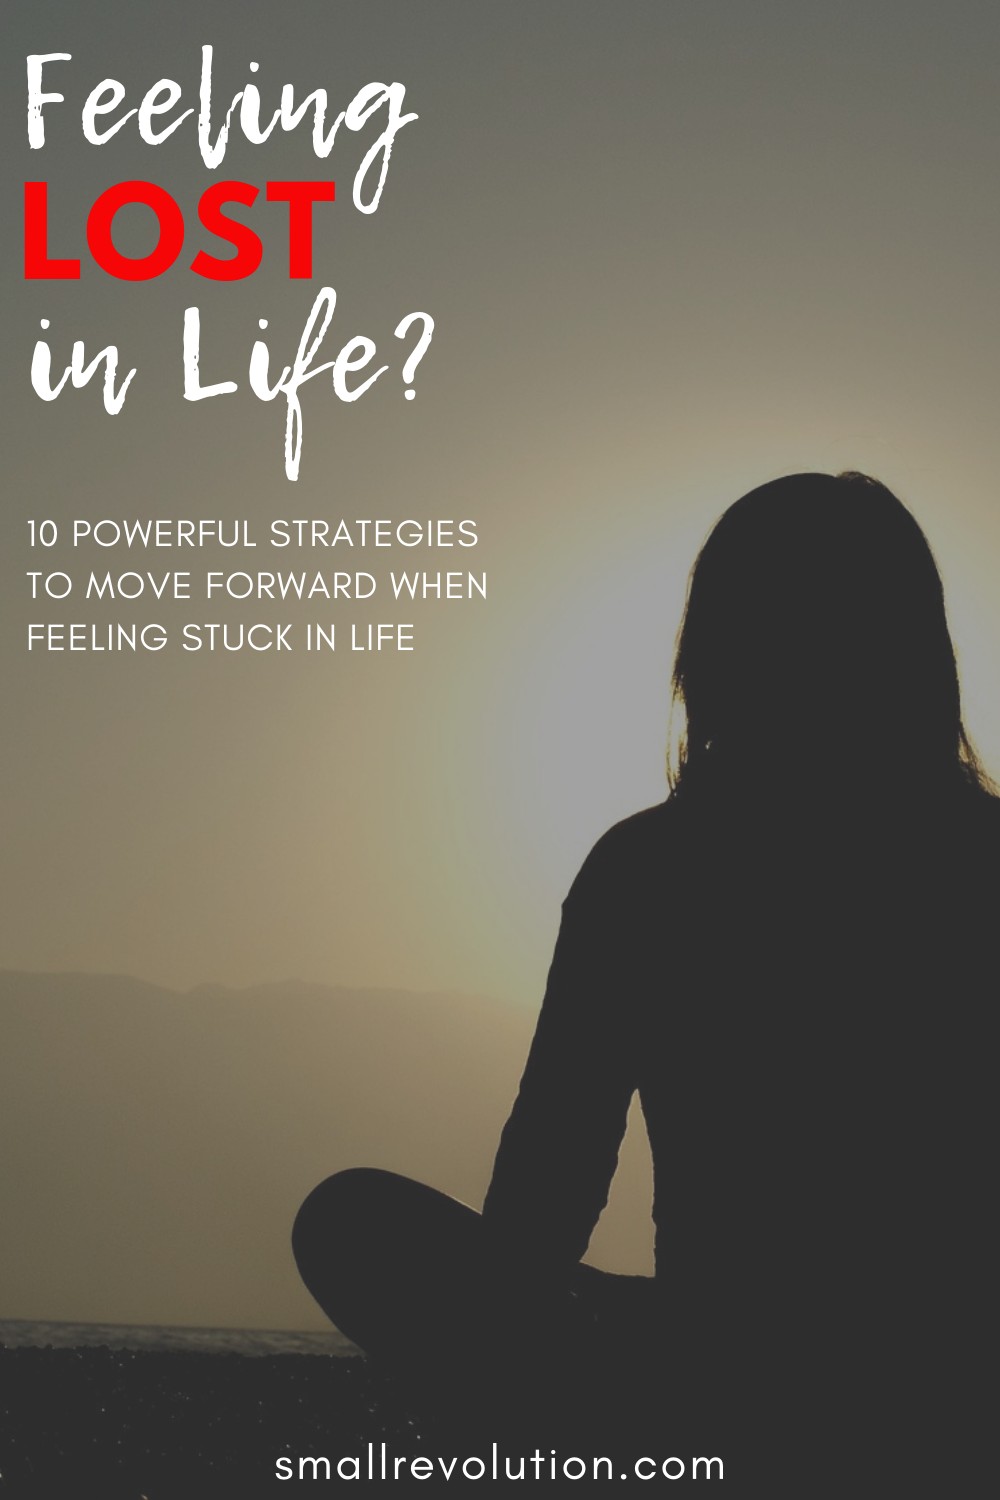 Feeling lost in life? 10 powerful strategies to move forward when feeling stuck in life